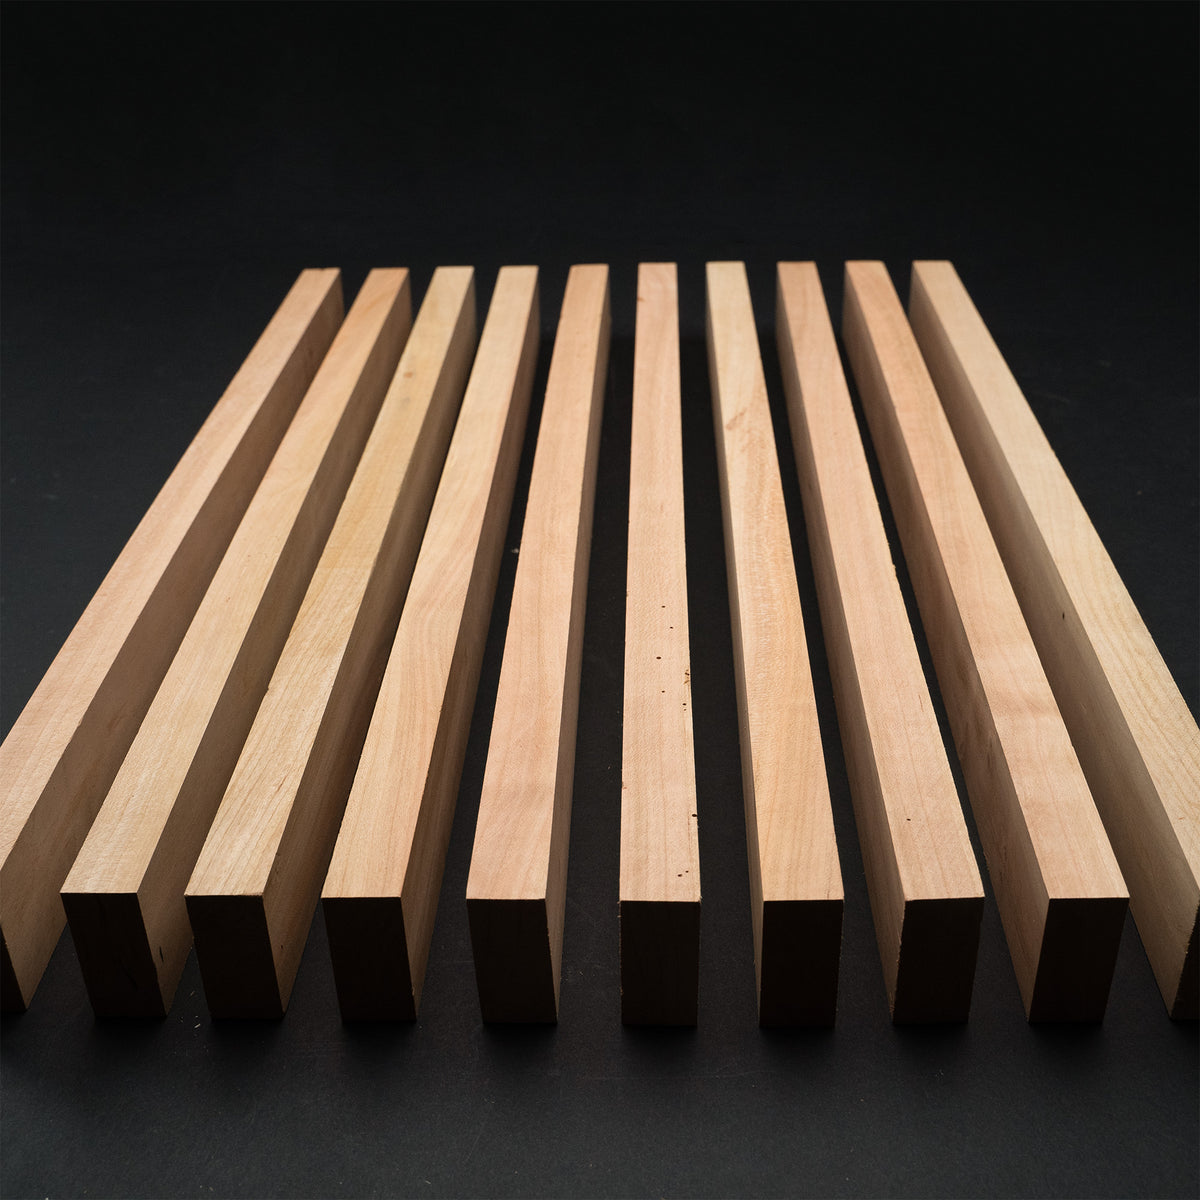 3/4&quot; x 2&quot; x 24&quot; Cherry Boards - Pack of 5, 10, 15 or 20 - DIY Cutting Charcuterie Cheese Boards Tray - Kiln Dried